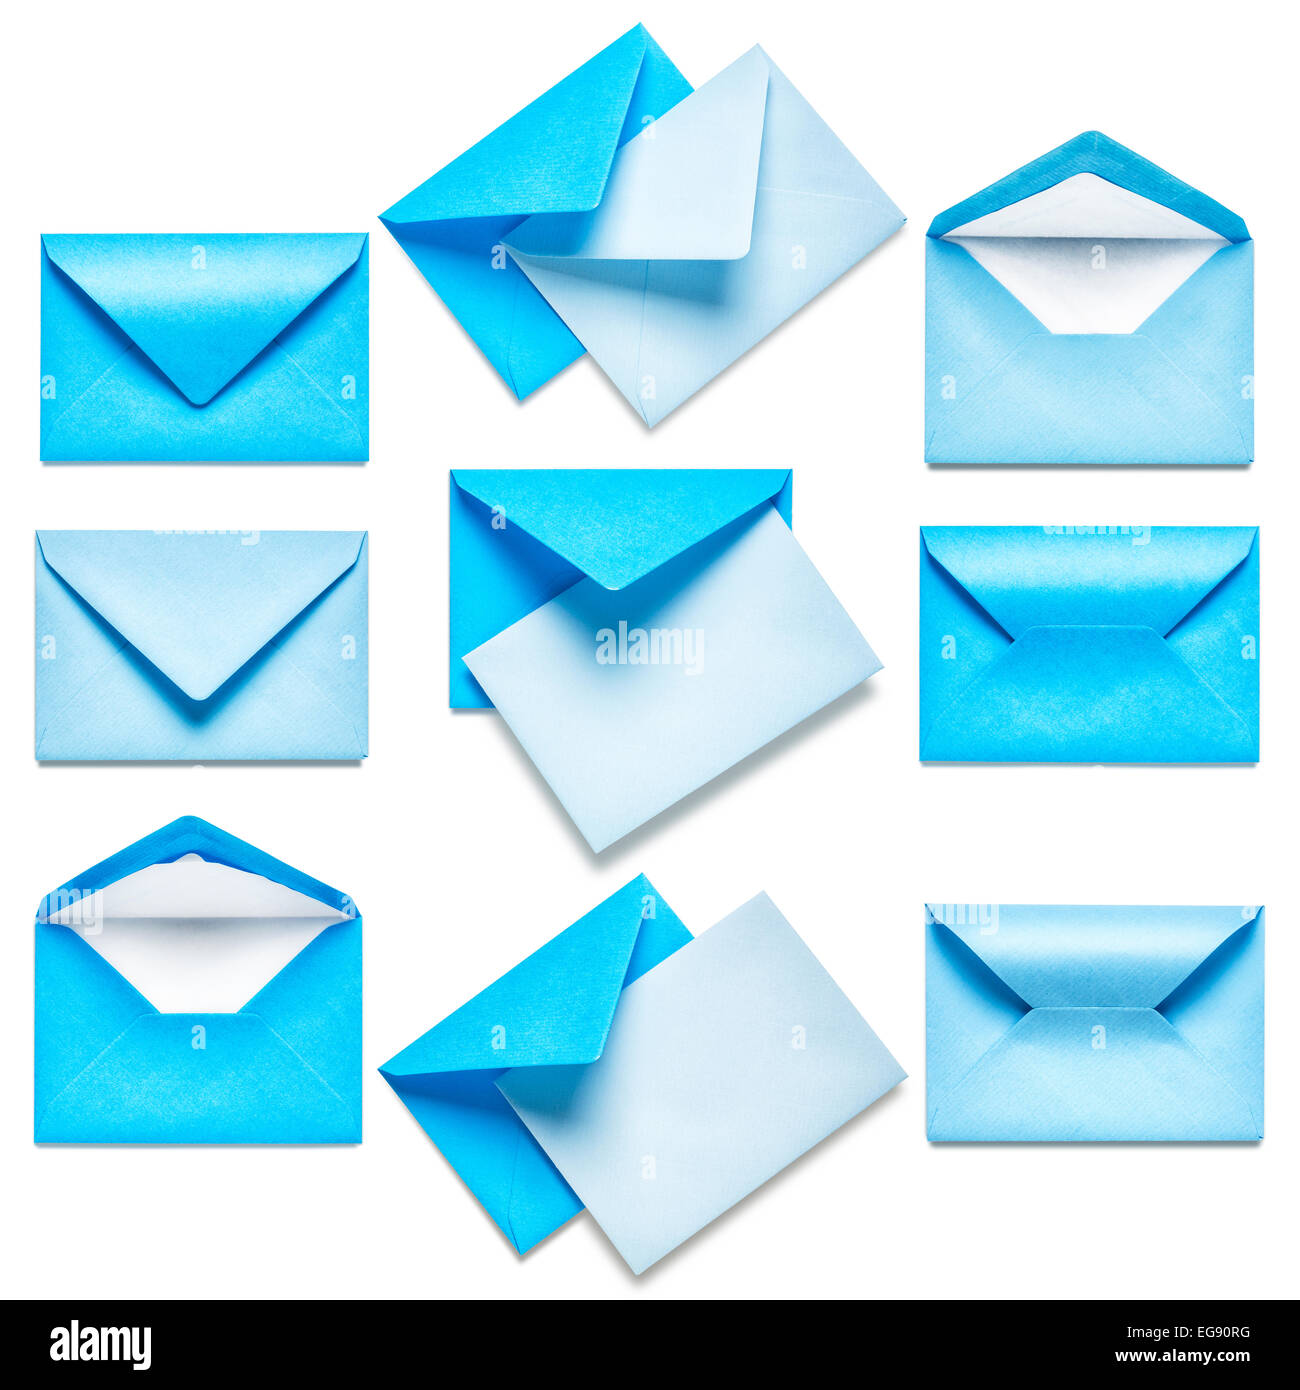 Blue envelopes with card collection isolated on white background Stock Photo